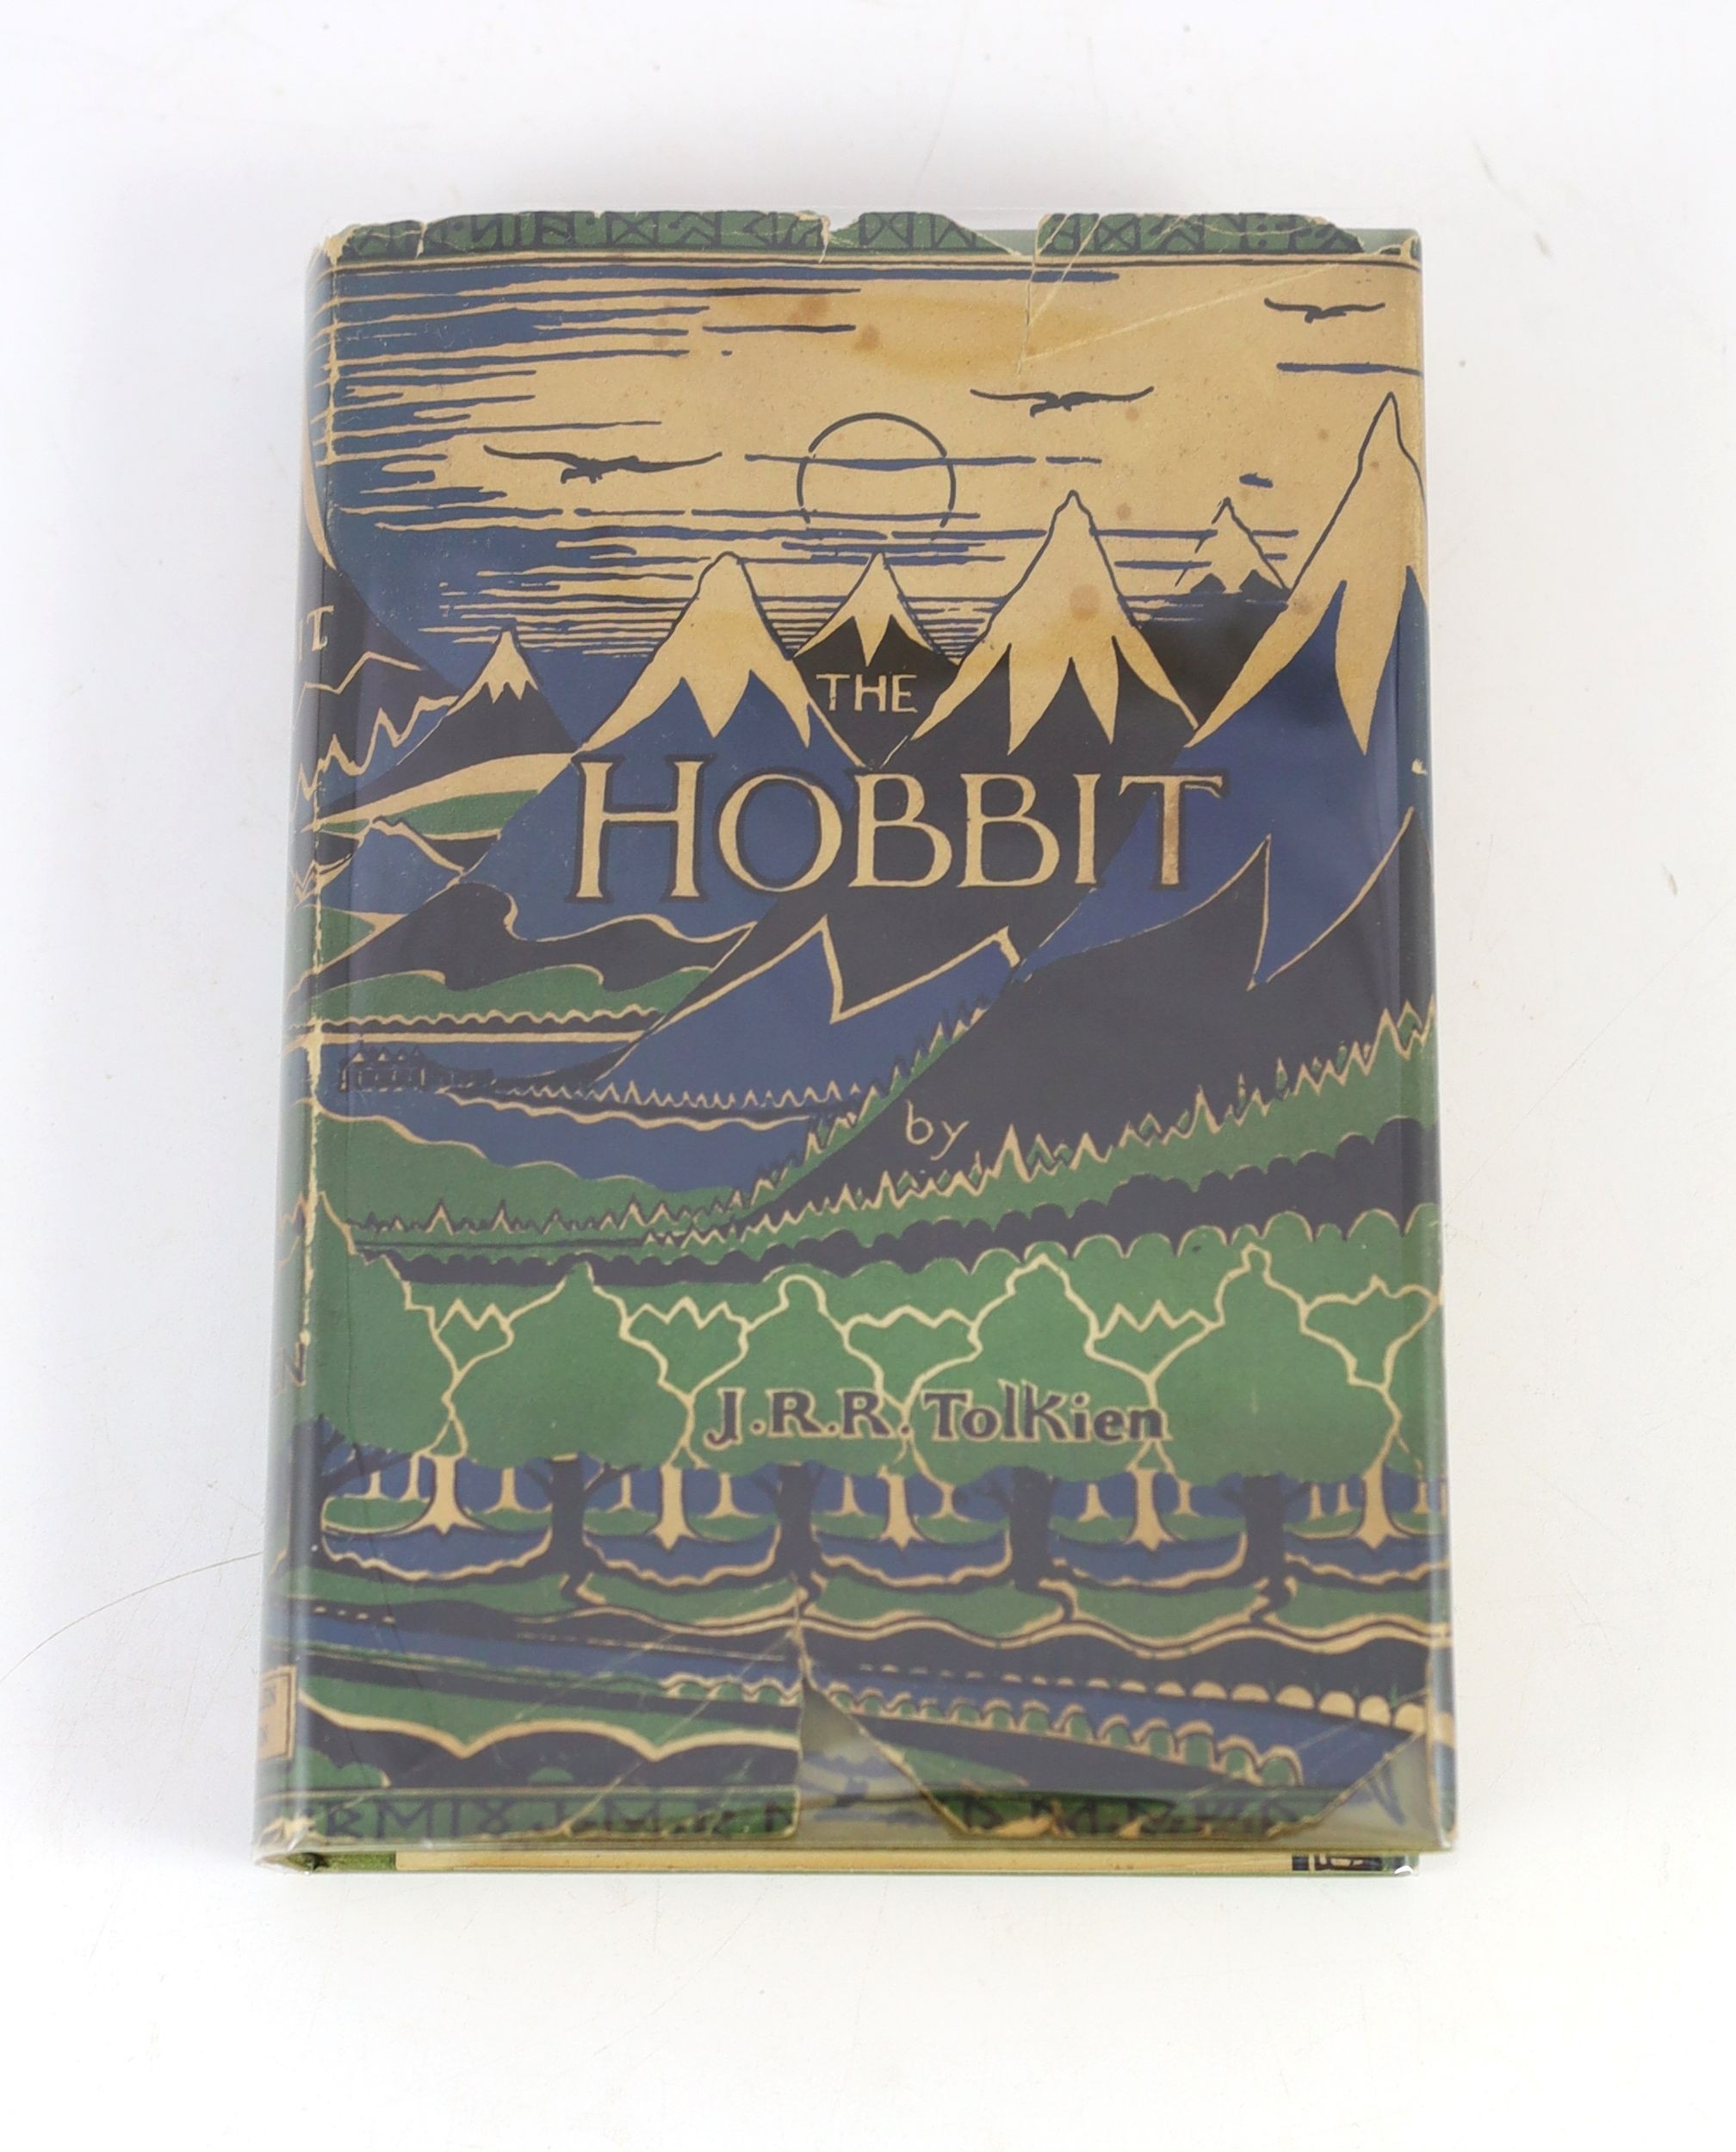 Tolkien, John Ronald Reuel - The Hobbit, 2nd edition, 10th impression, with colour frontispiece, map endpapers, original green cloth in unclipped d/j, with small loss to lower front panel and top edge, George Allen and U